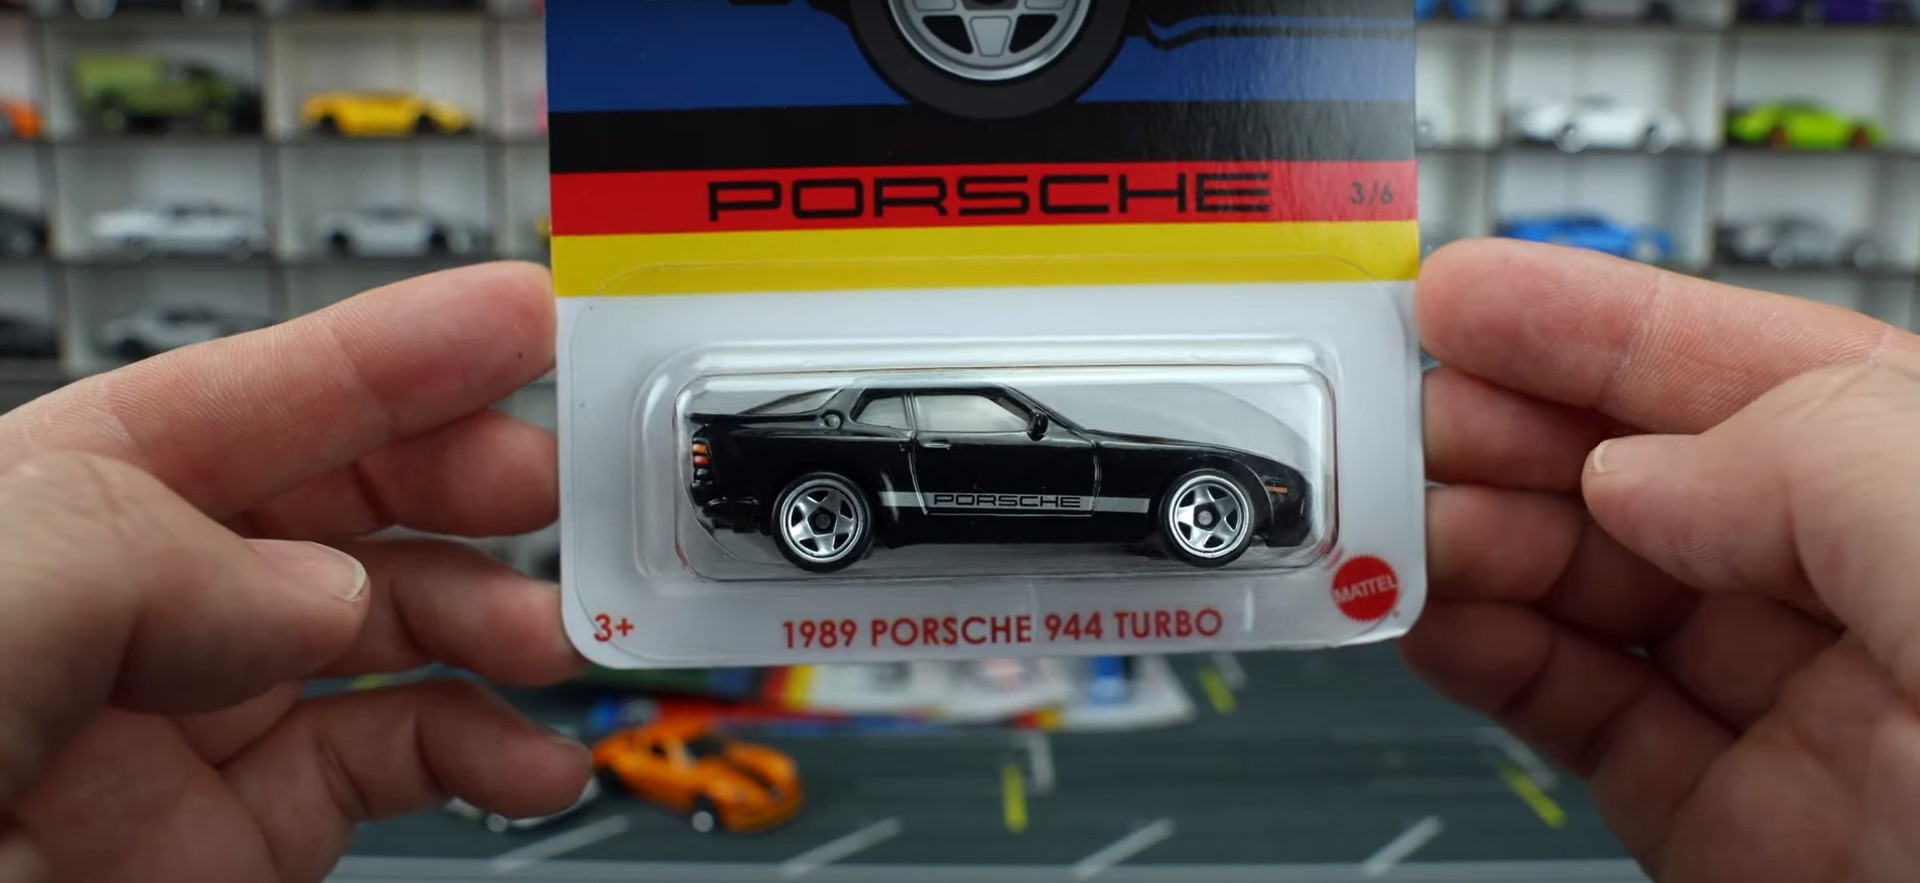 New Hot Wheels Set of Six Porsches Will Sell Like Hot Cakes - autoevolution